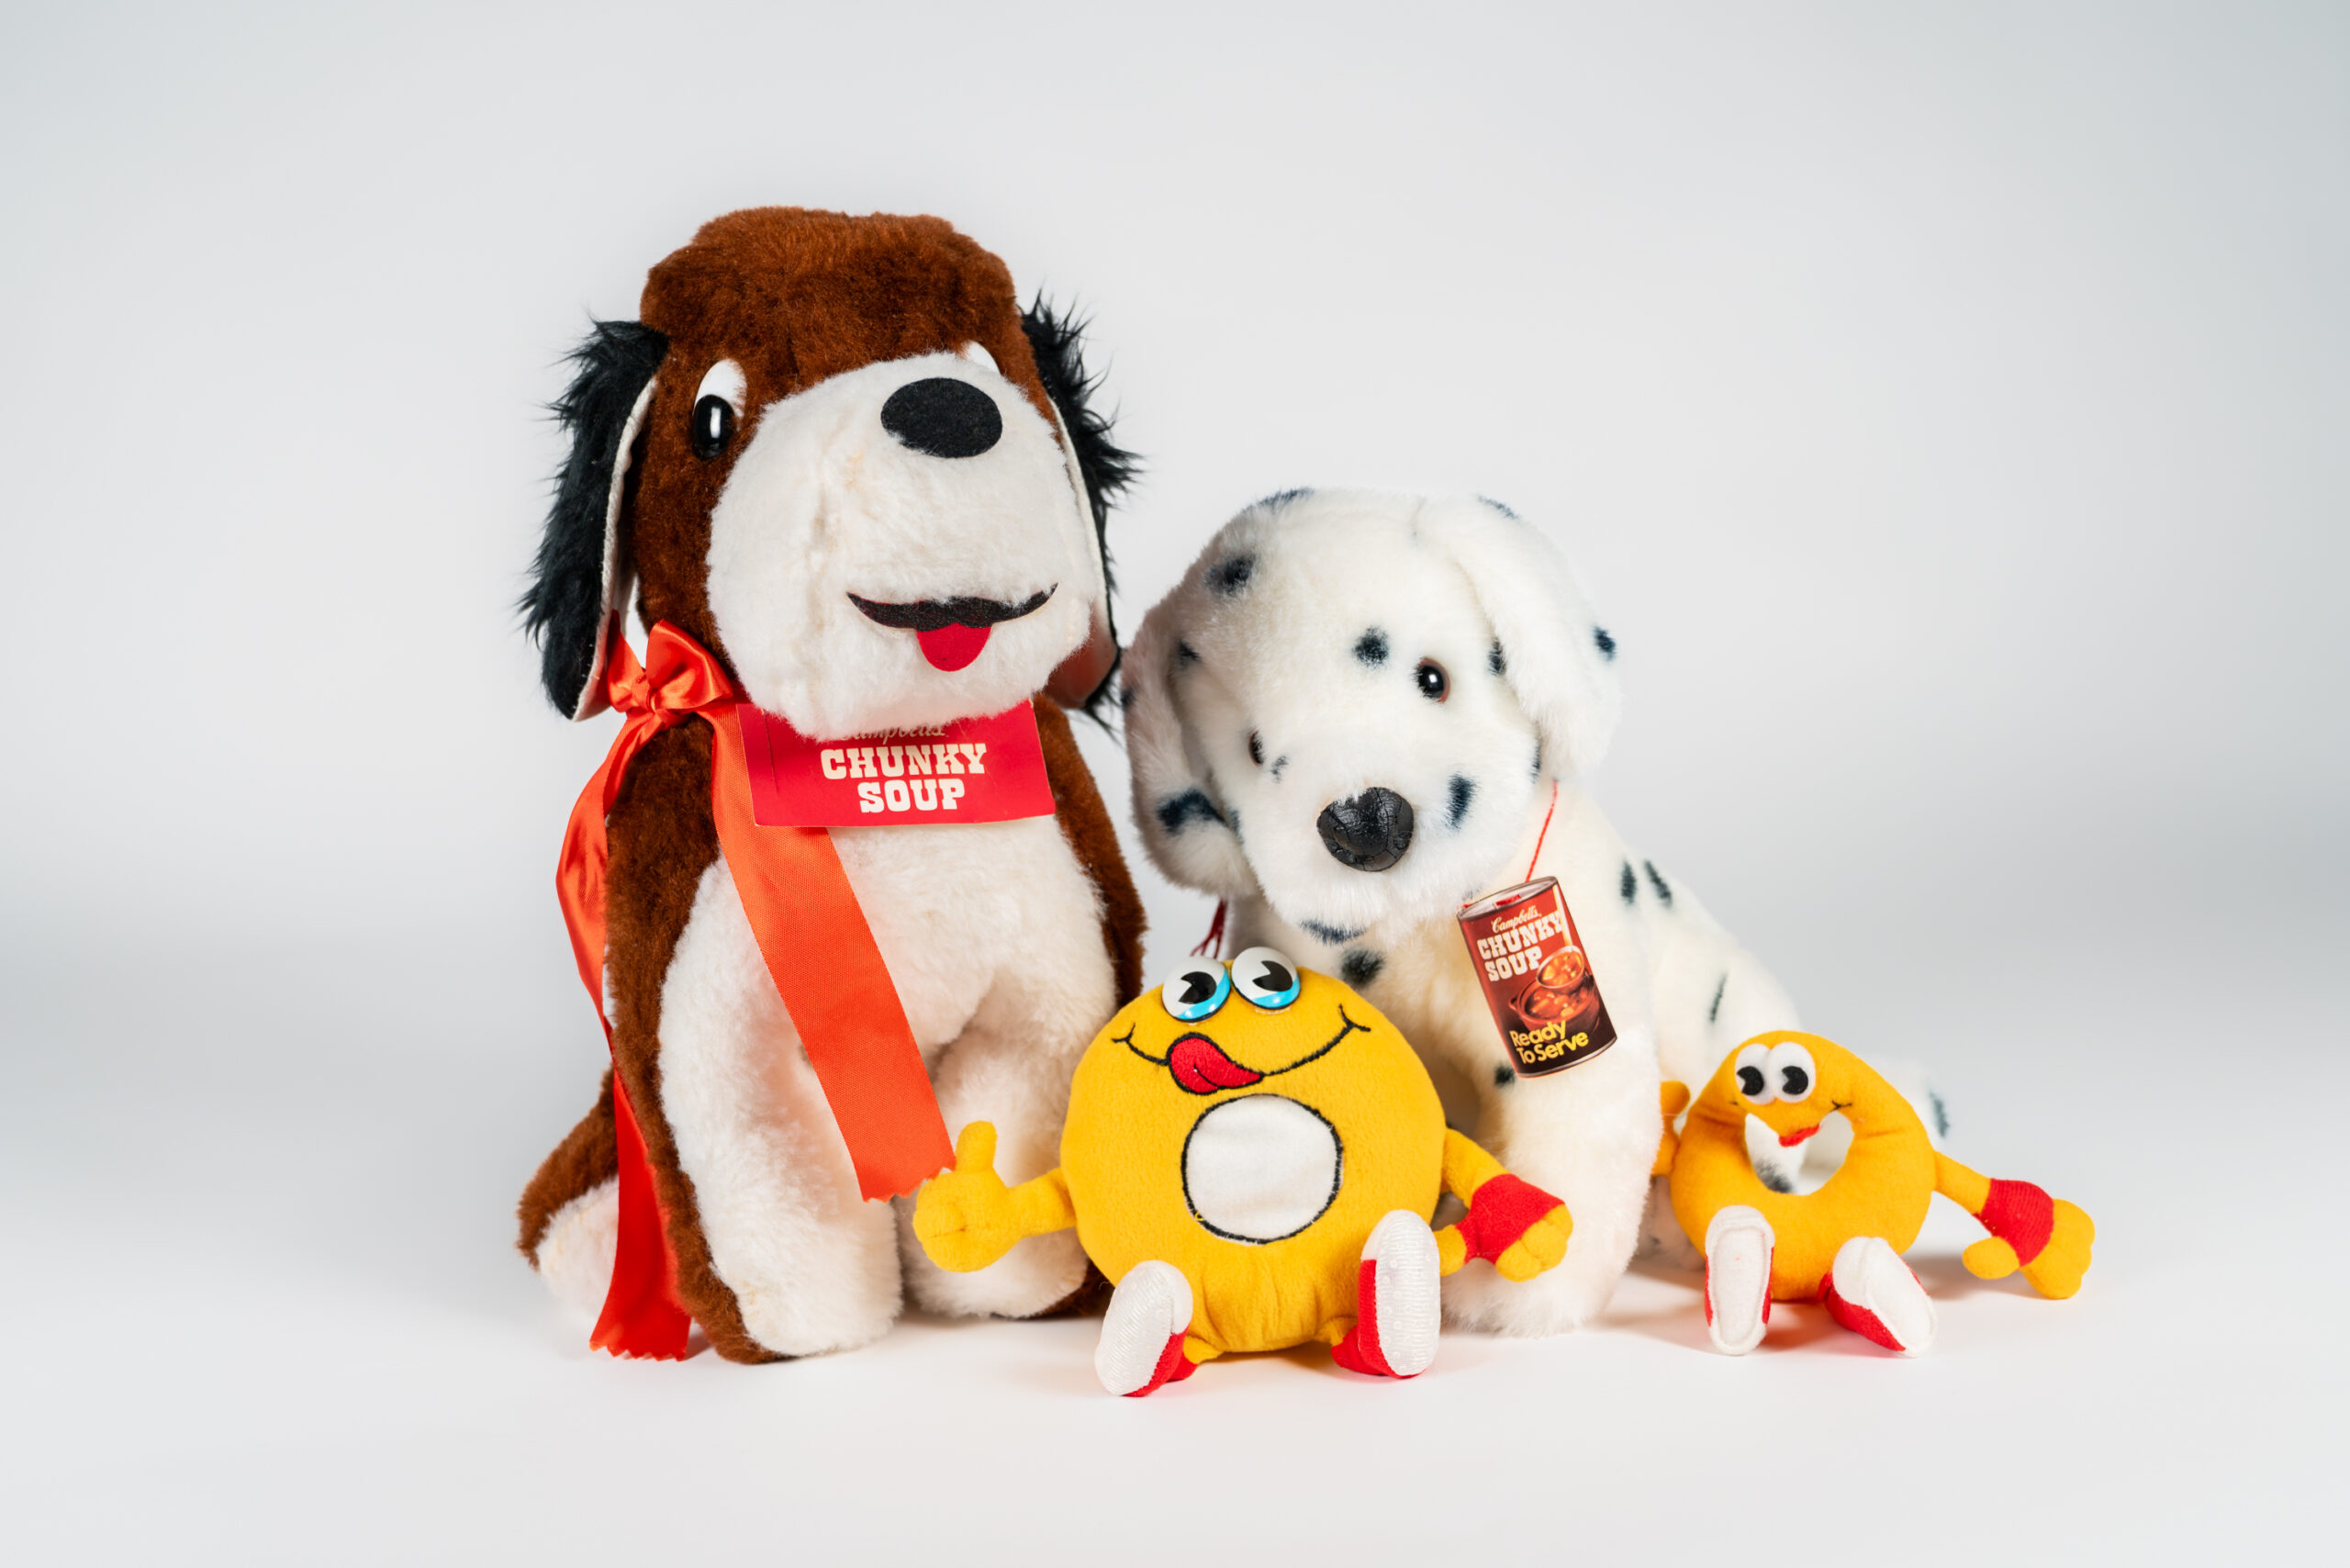 Plush toys of Campbell's Chunky dogs and SpaghettiOs TheO